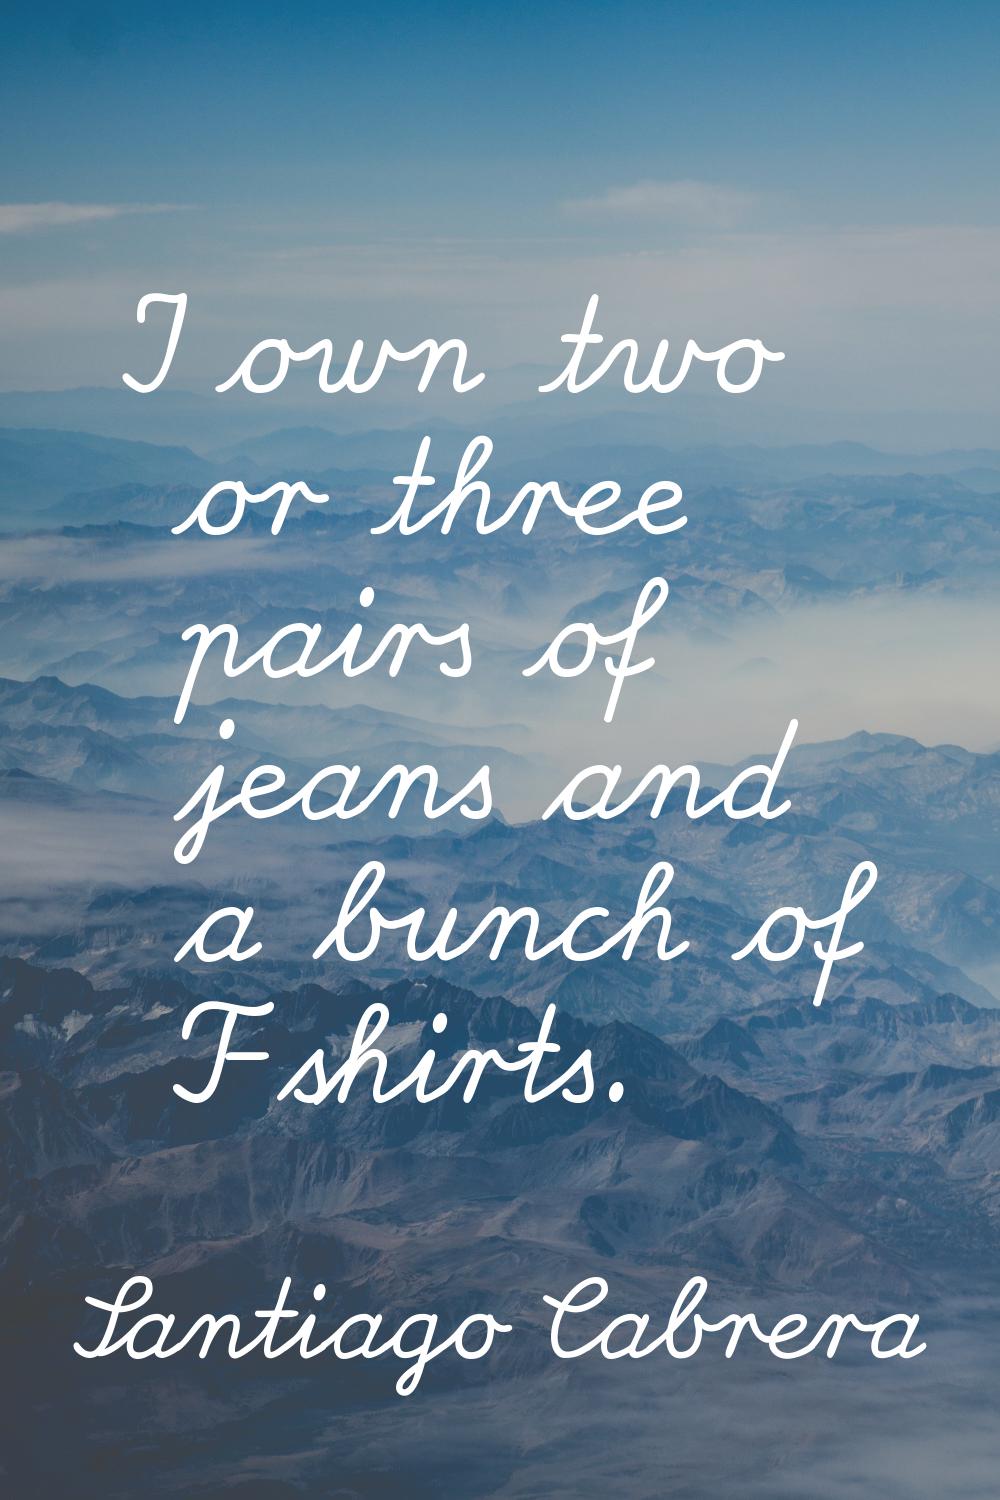 I own two or three pairs of jeans and a bunch of T-shirts.